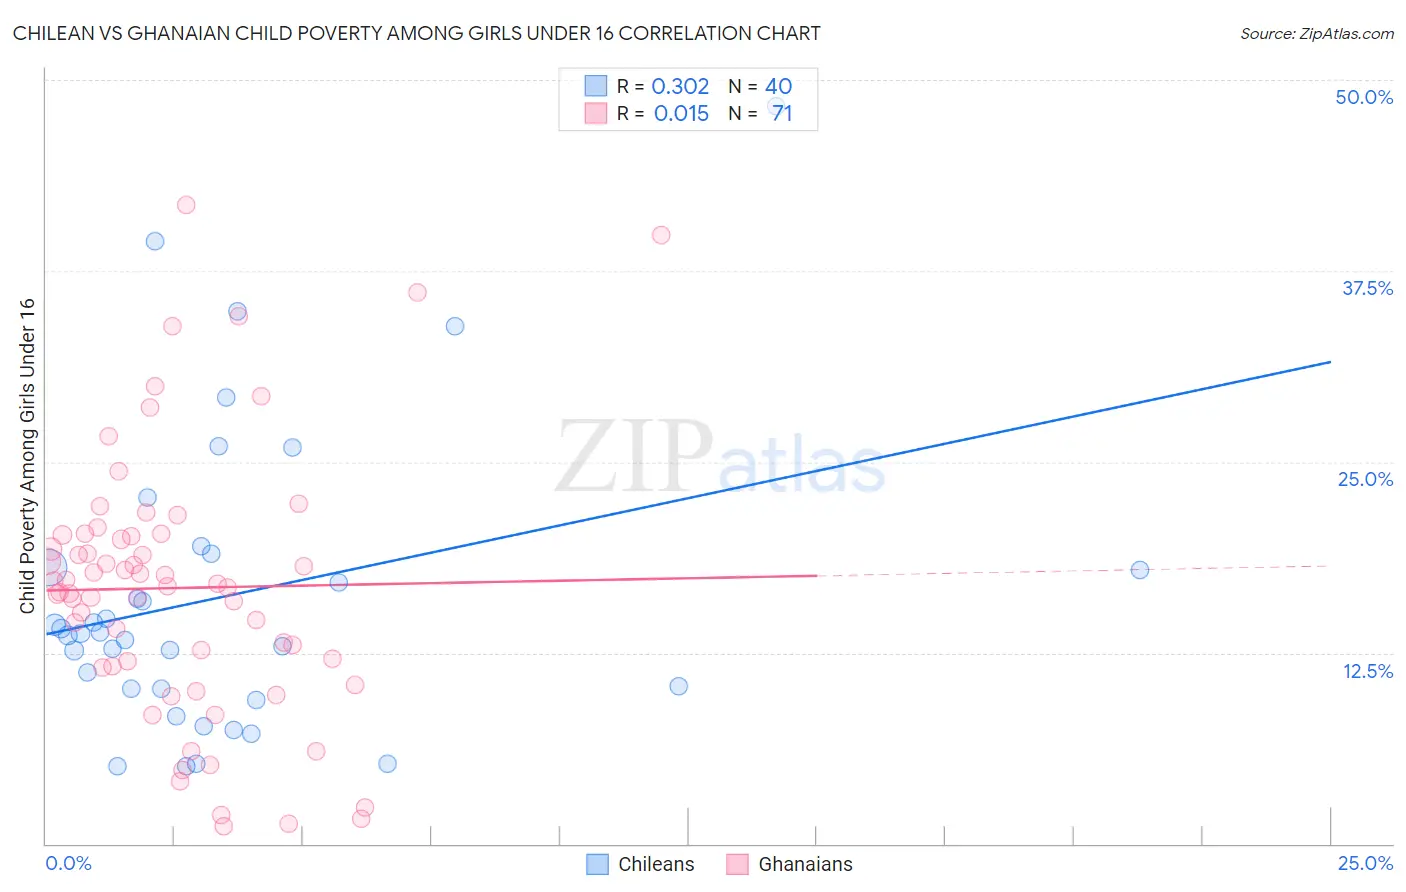 Chilean vs Ghanaian Child Poverty Among Girls Under 16